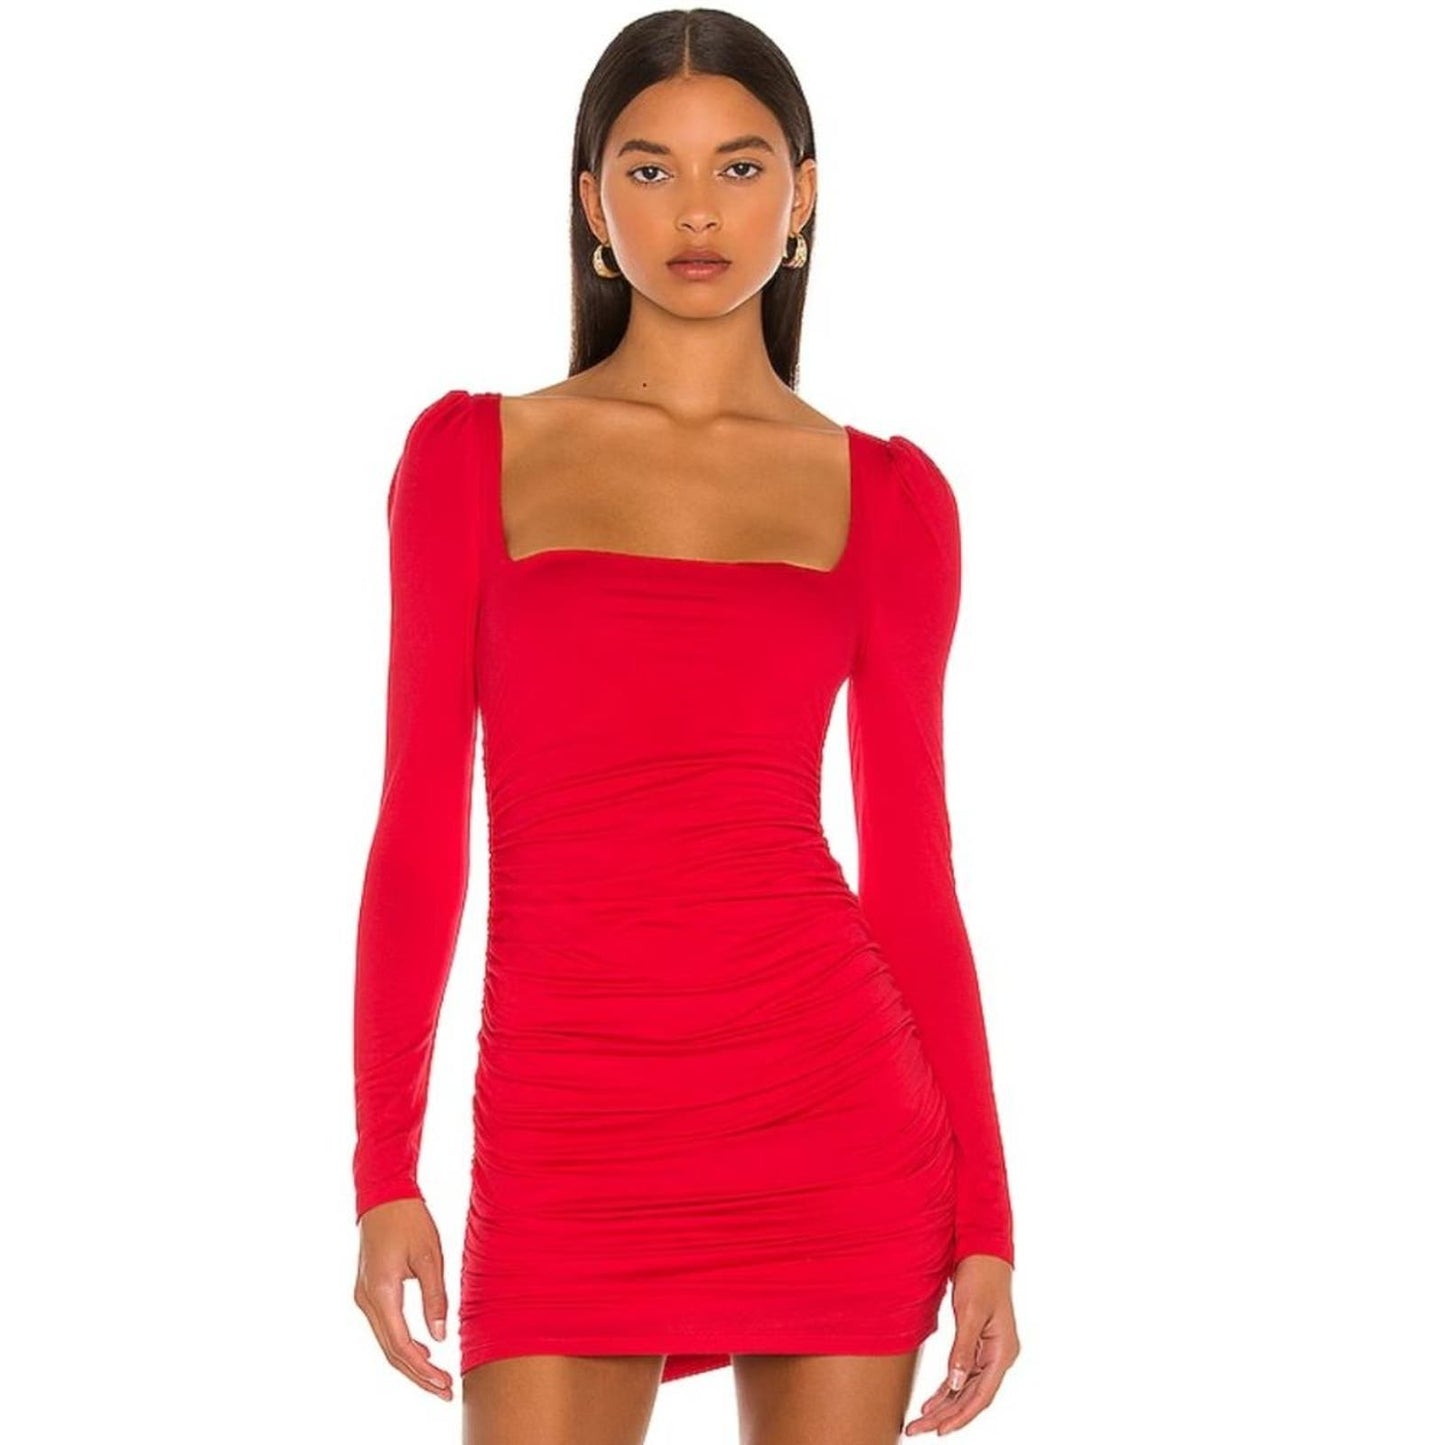 Lovers & Friends Bennet Mini Dress in Red NWOT Size Small